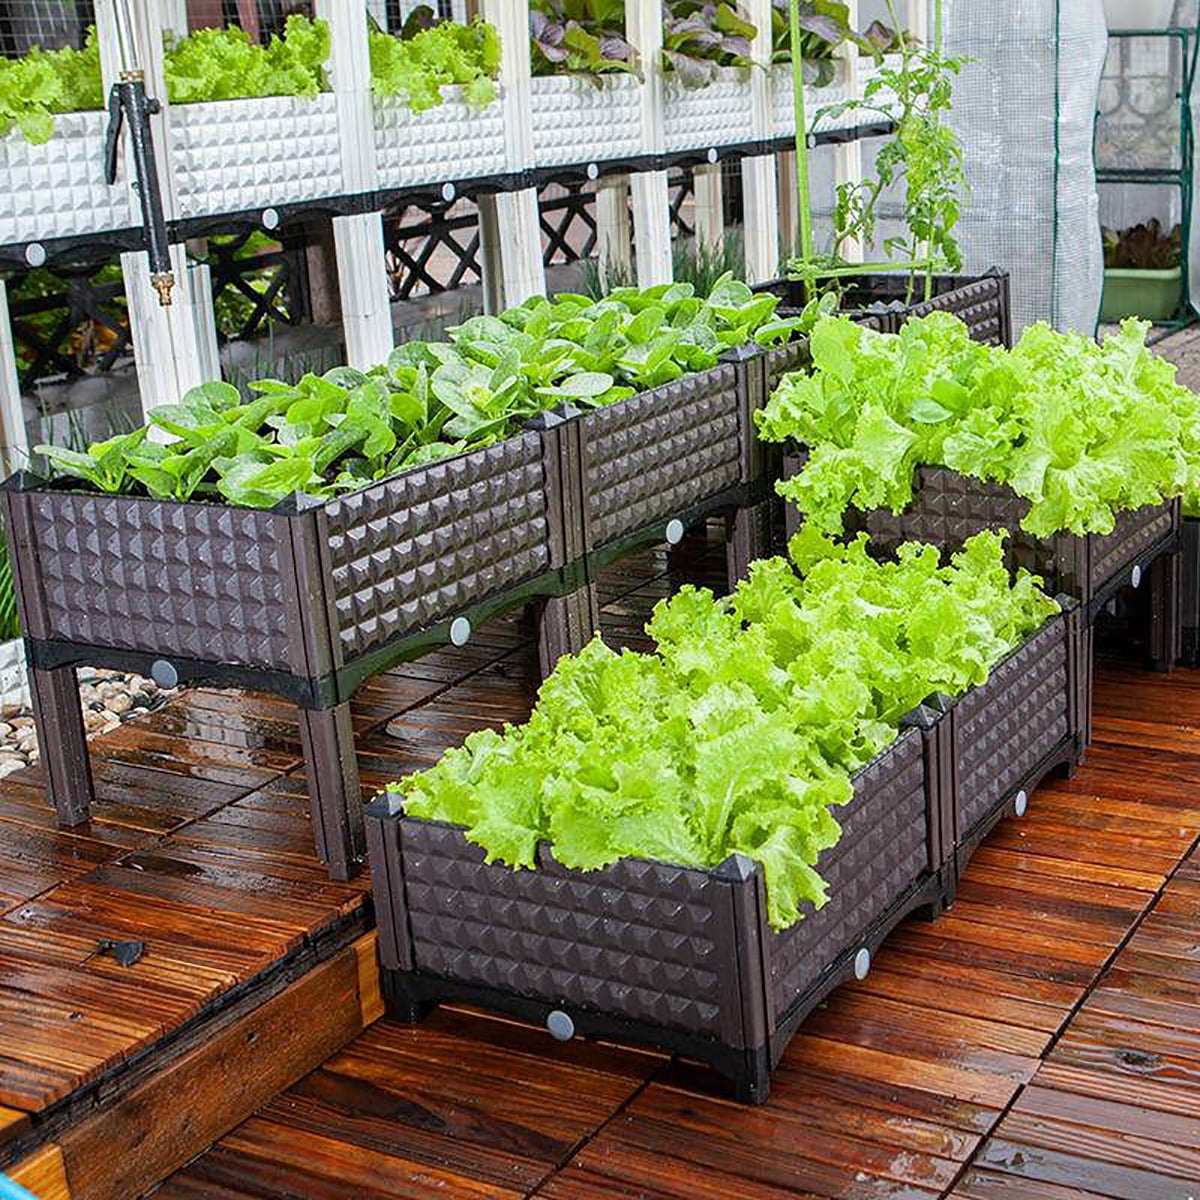 15.7 inches Vegetable Bed Raised Garden Bed for Vegetables Elevated ...